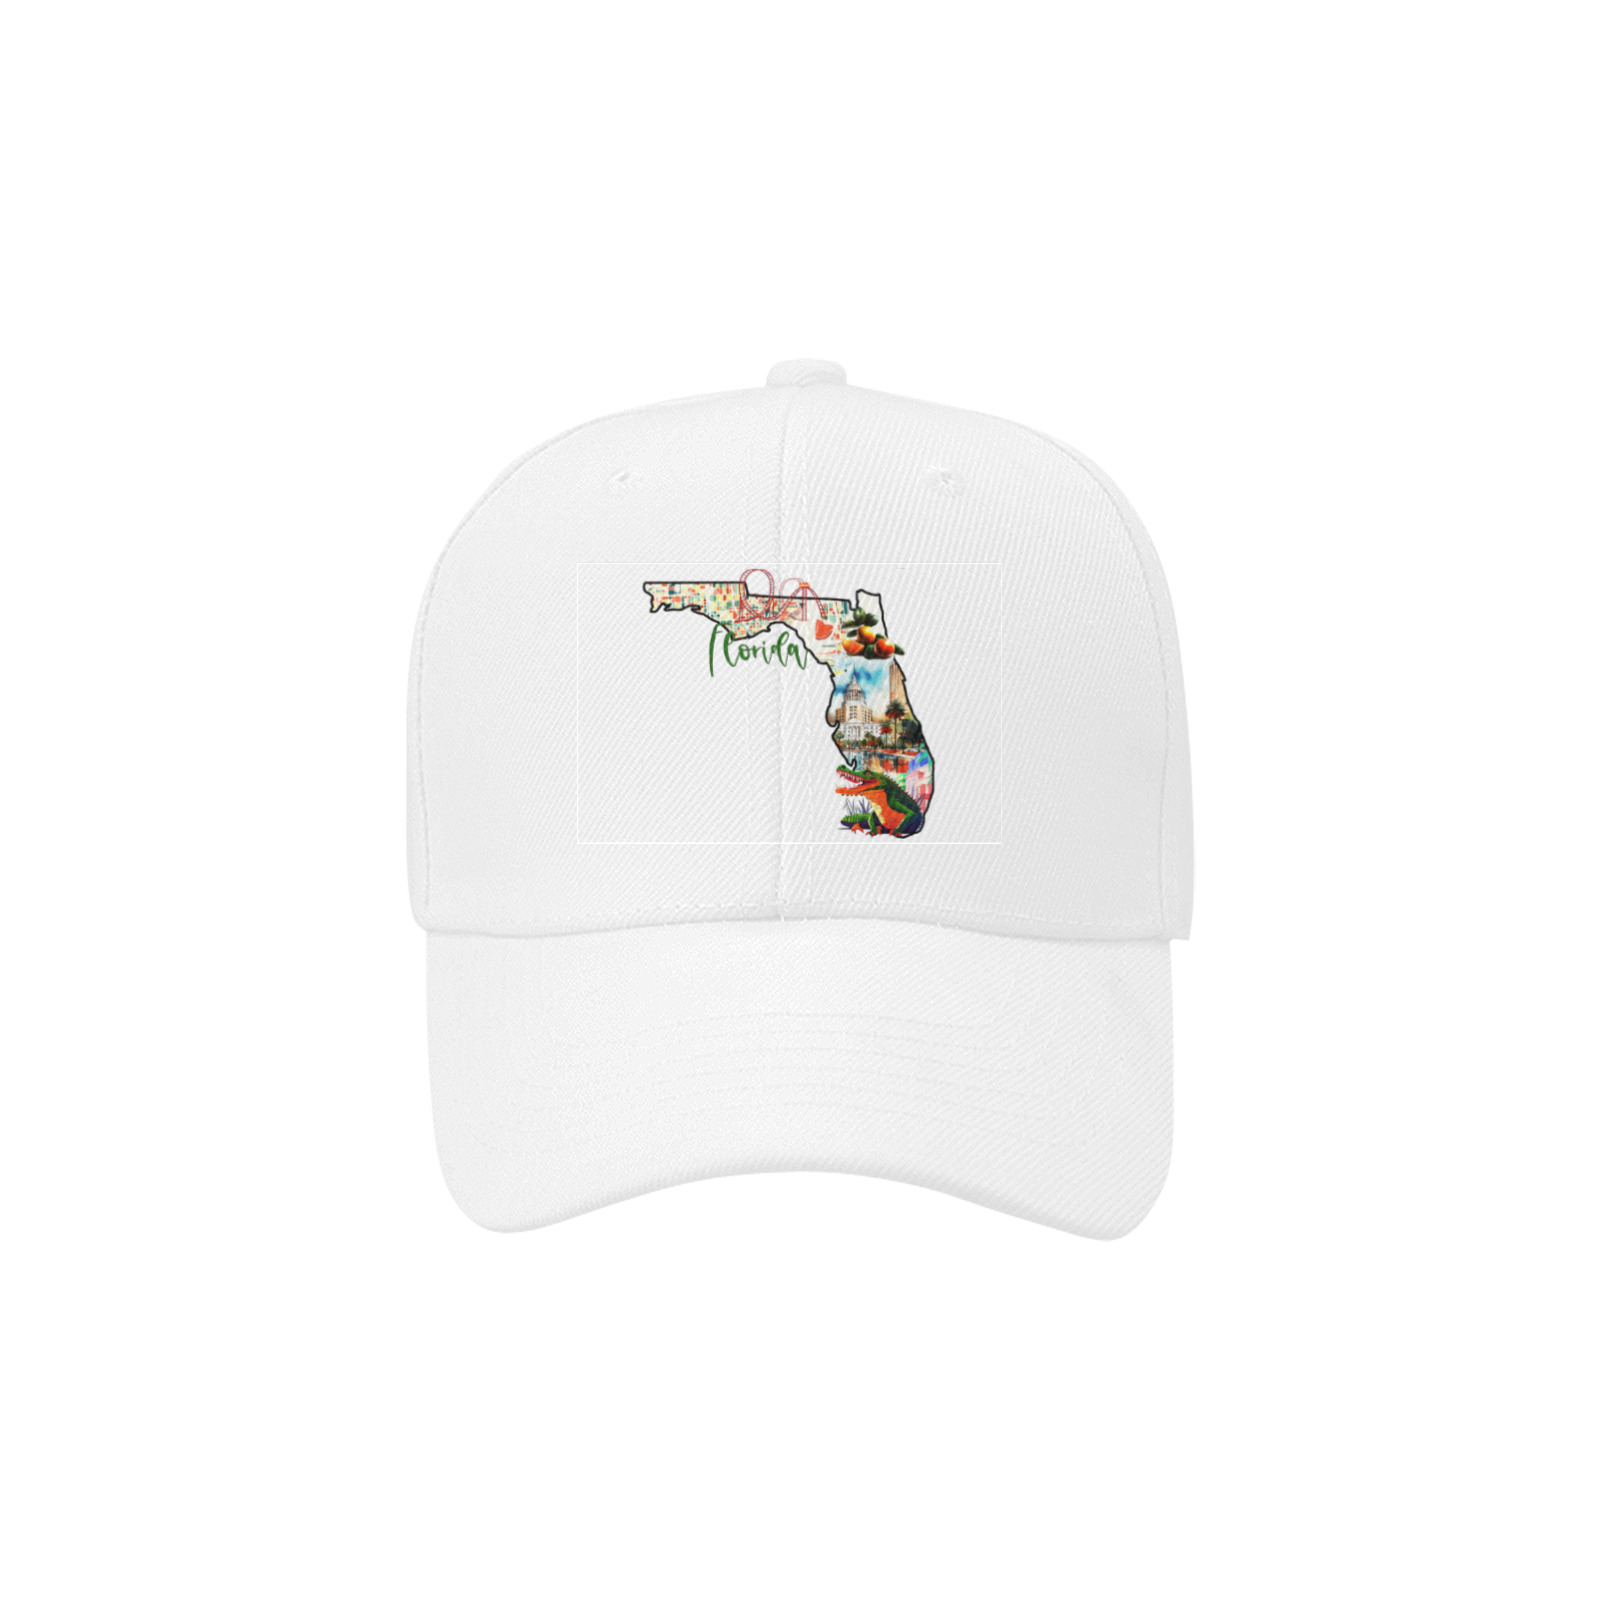 The State Of  Florida Dad Cap